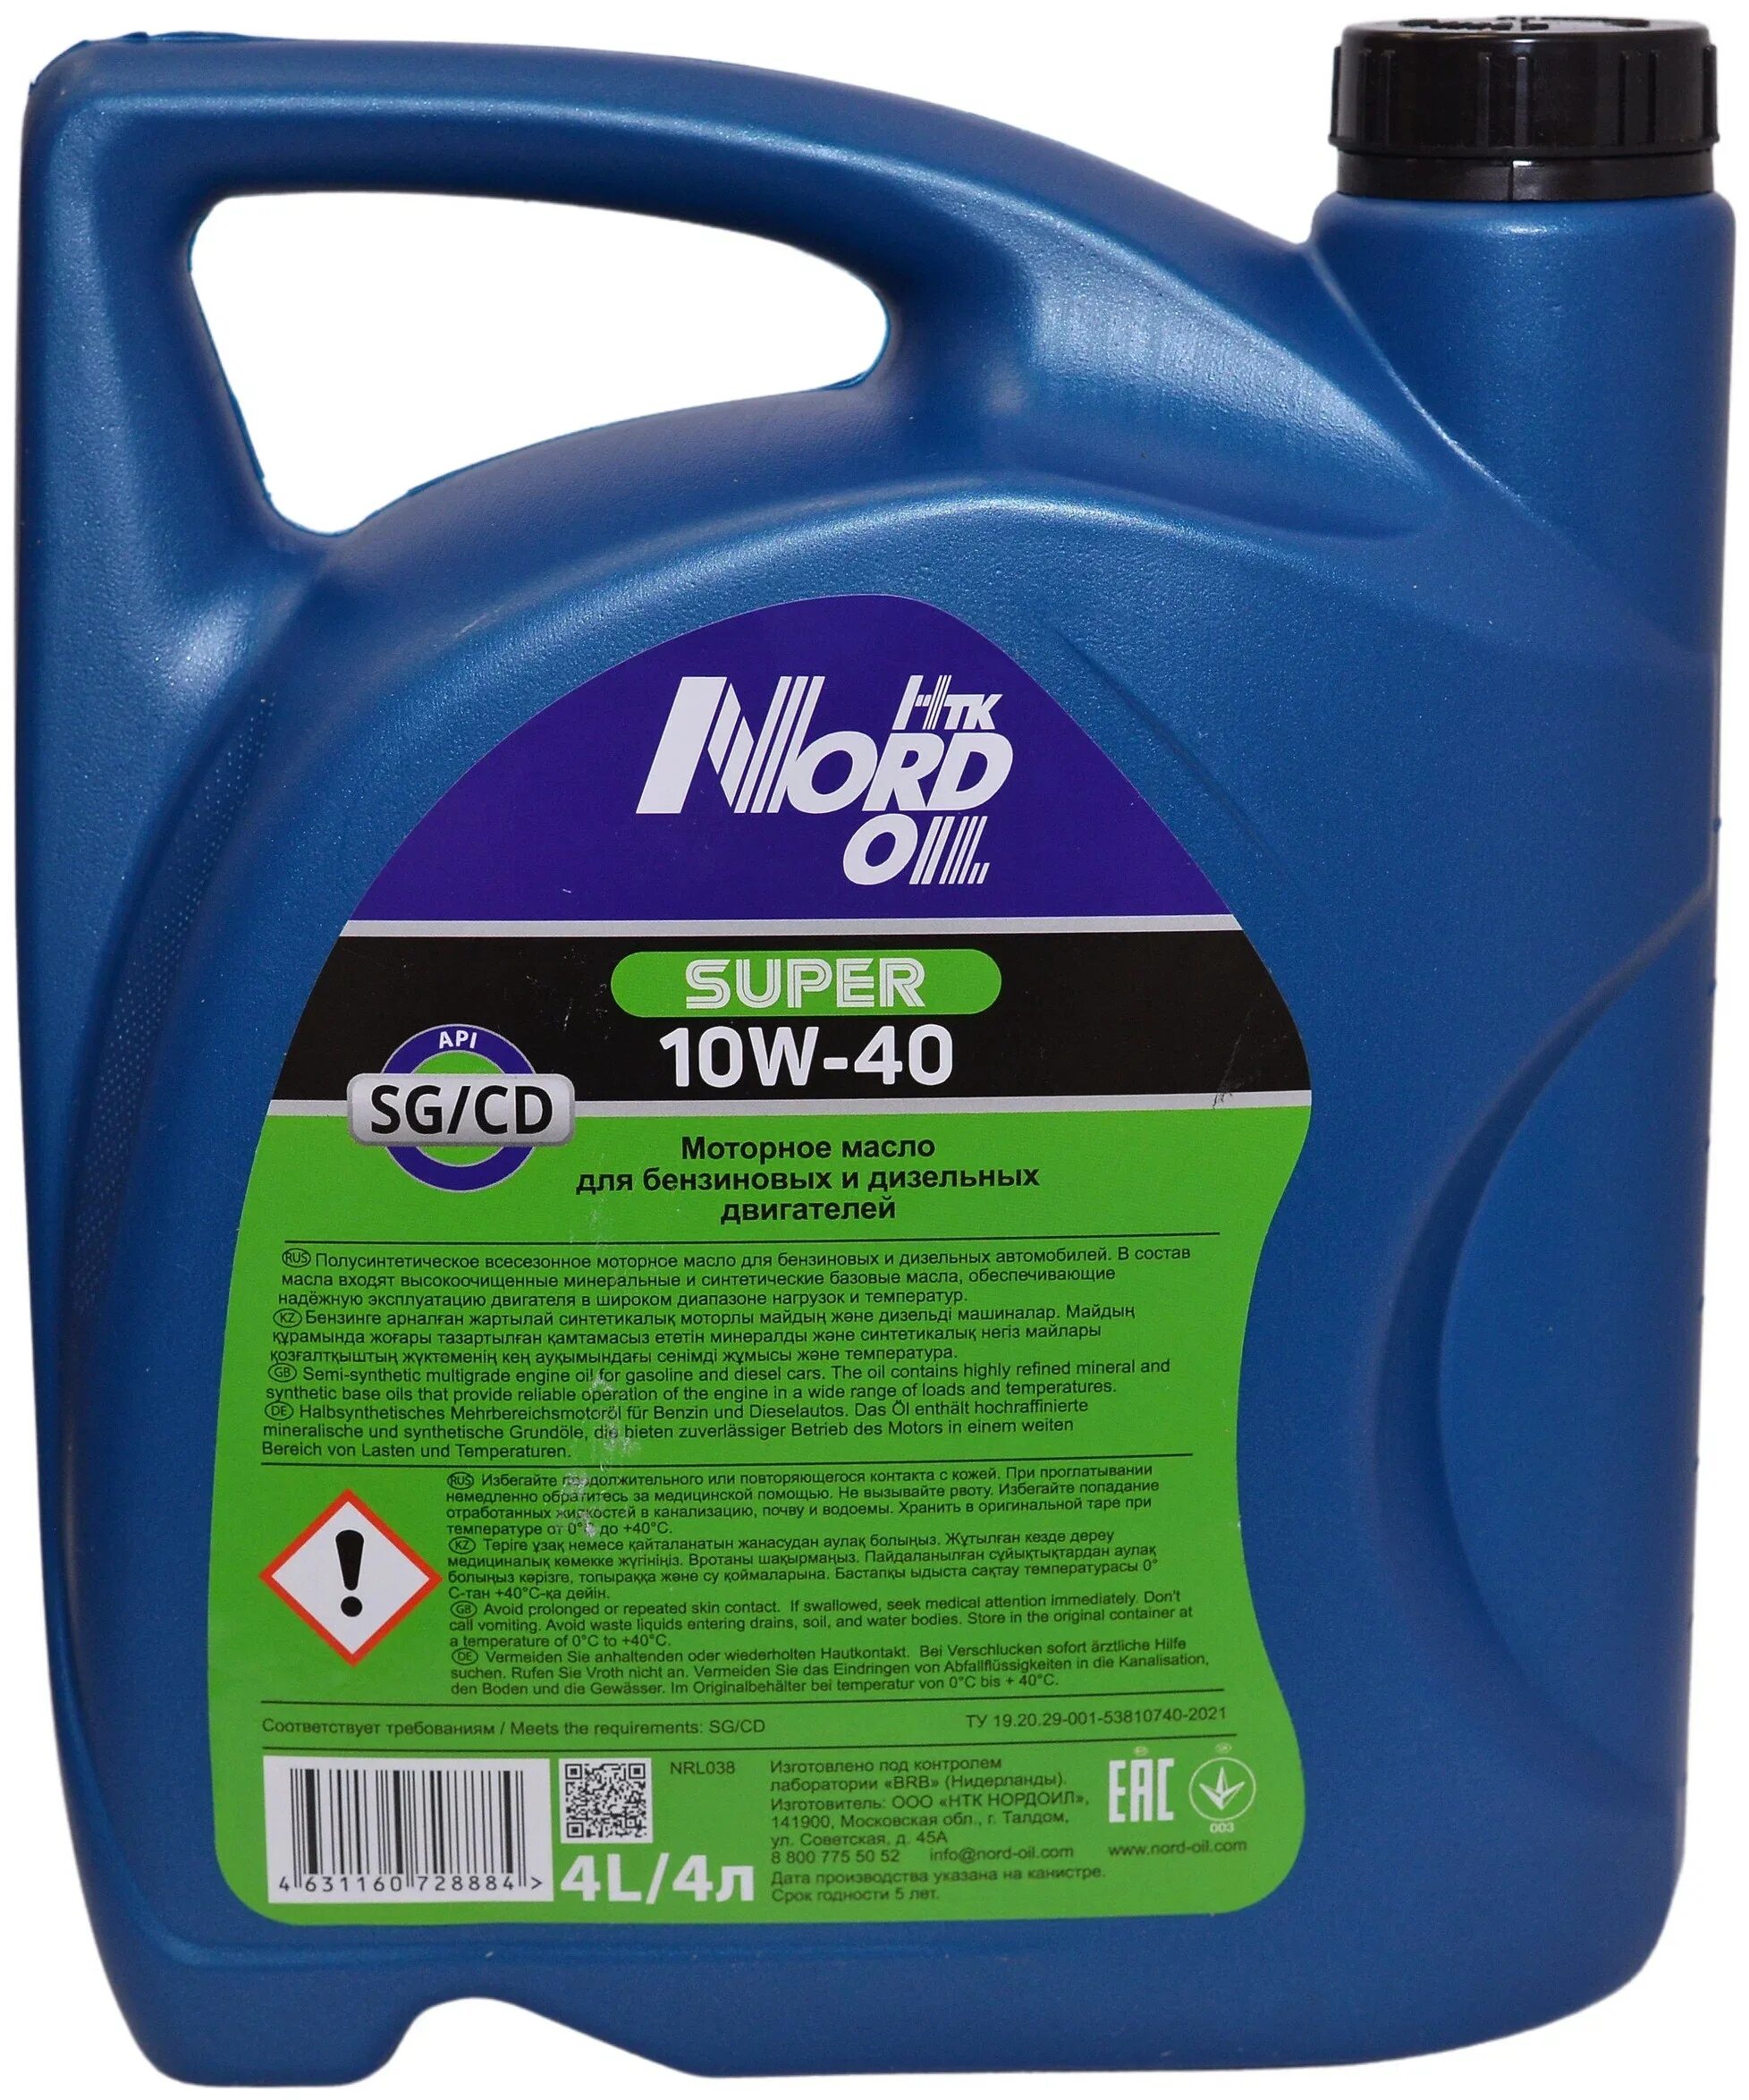 Nord Oil 10w-40. Масло Nord Oil 10 40. Nord Oil nrl038 масло моторное Nord Oil super 10w-4. Nrl038 Nord Oil масло Nord Oil super 10w-40 SG/CD 4л. Моторное масло можно отзывы